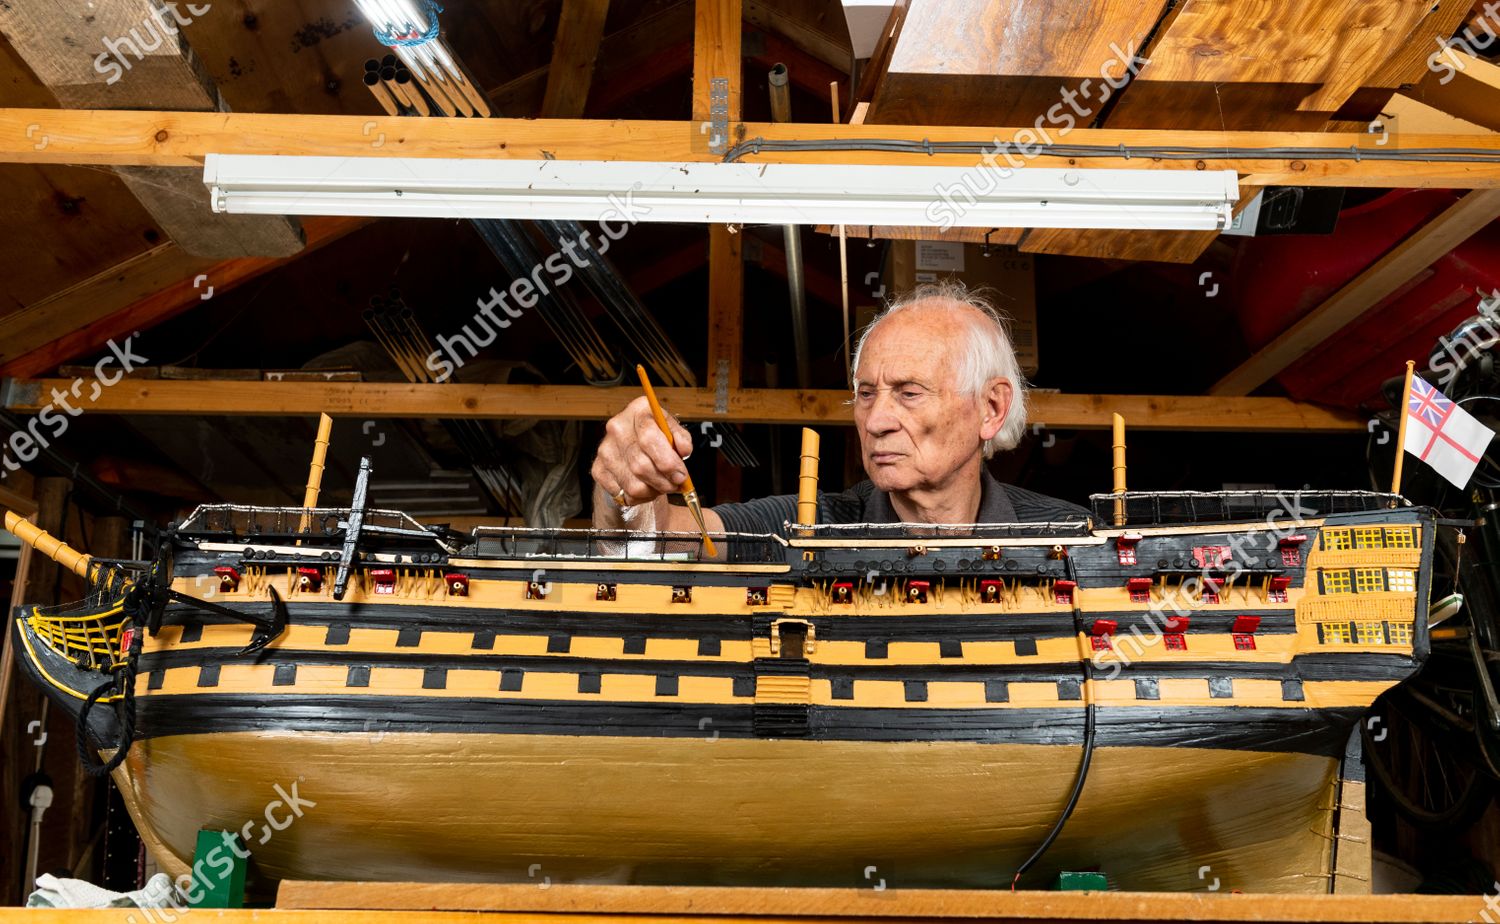 Retired Sailor Finally Completing His Painstaking Model Editorial Stock Photo Stock Image Shutterstock